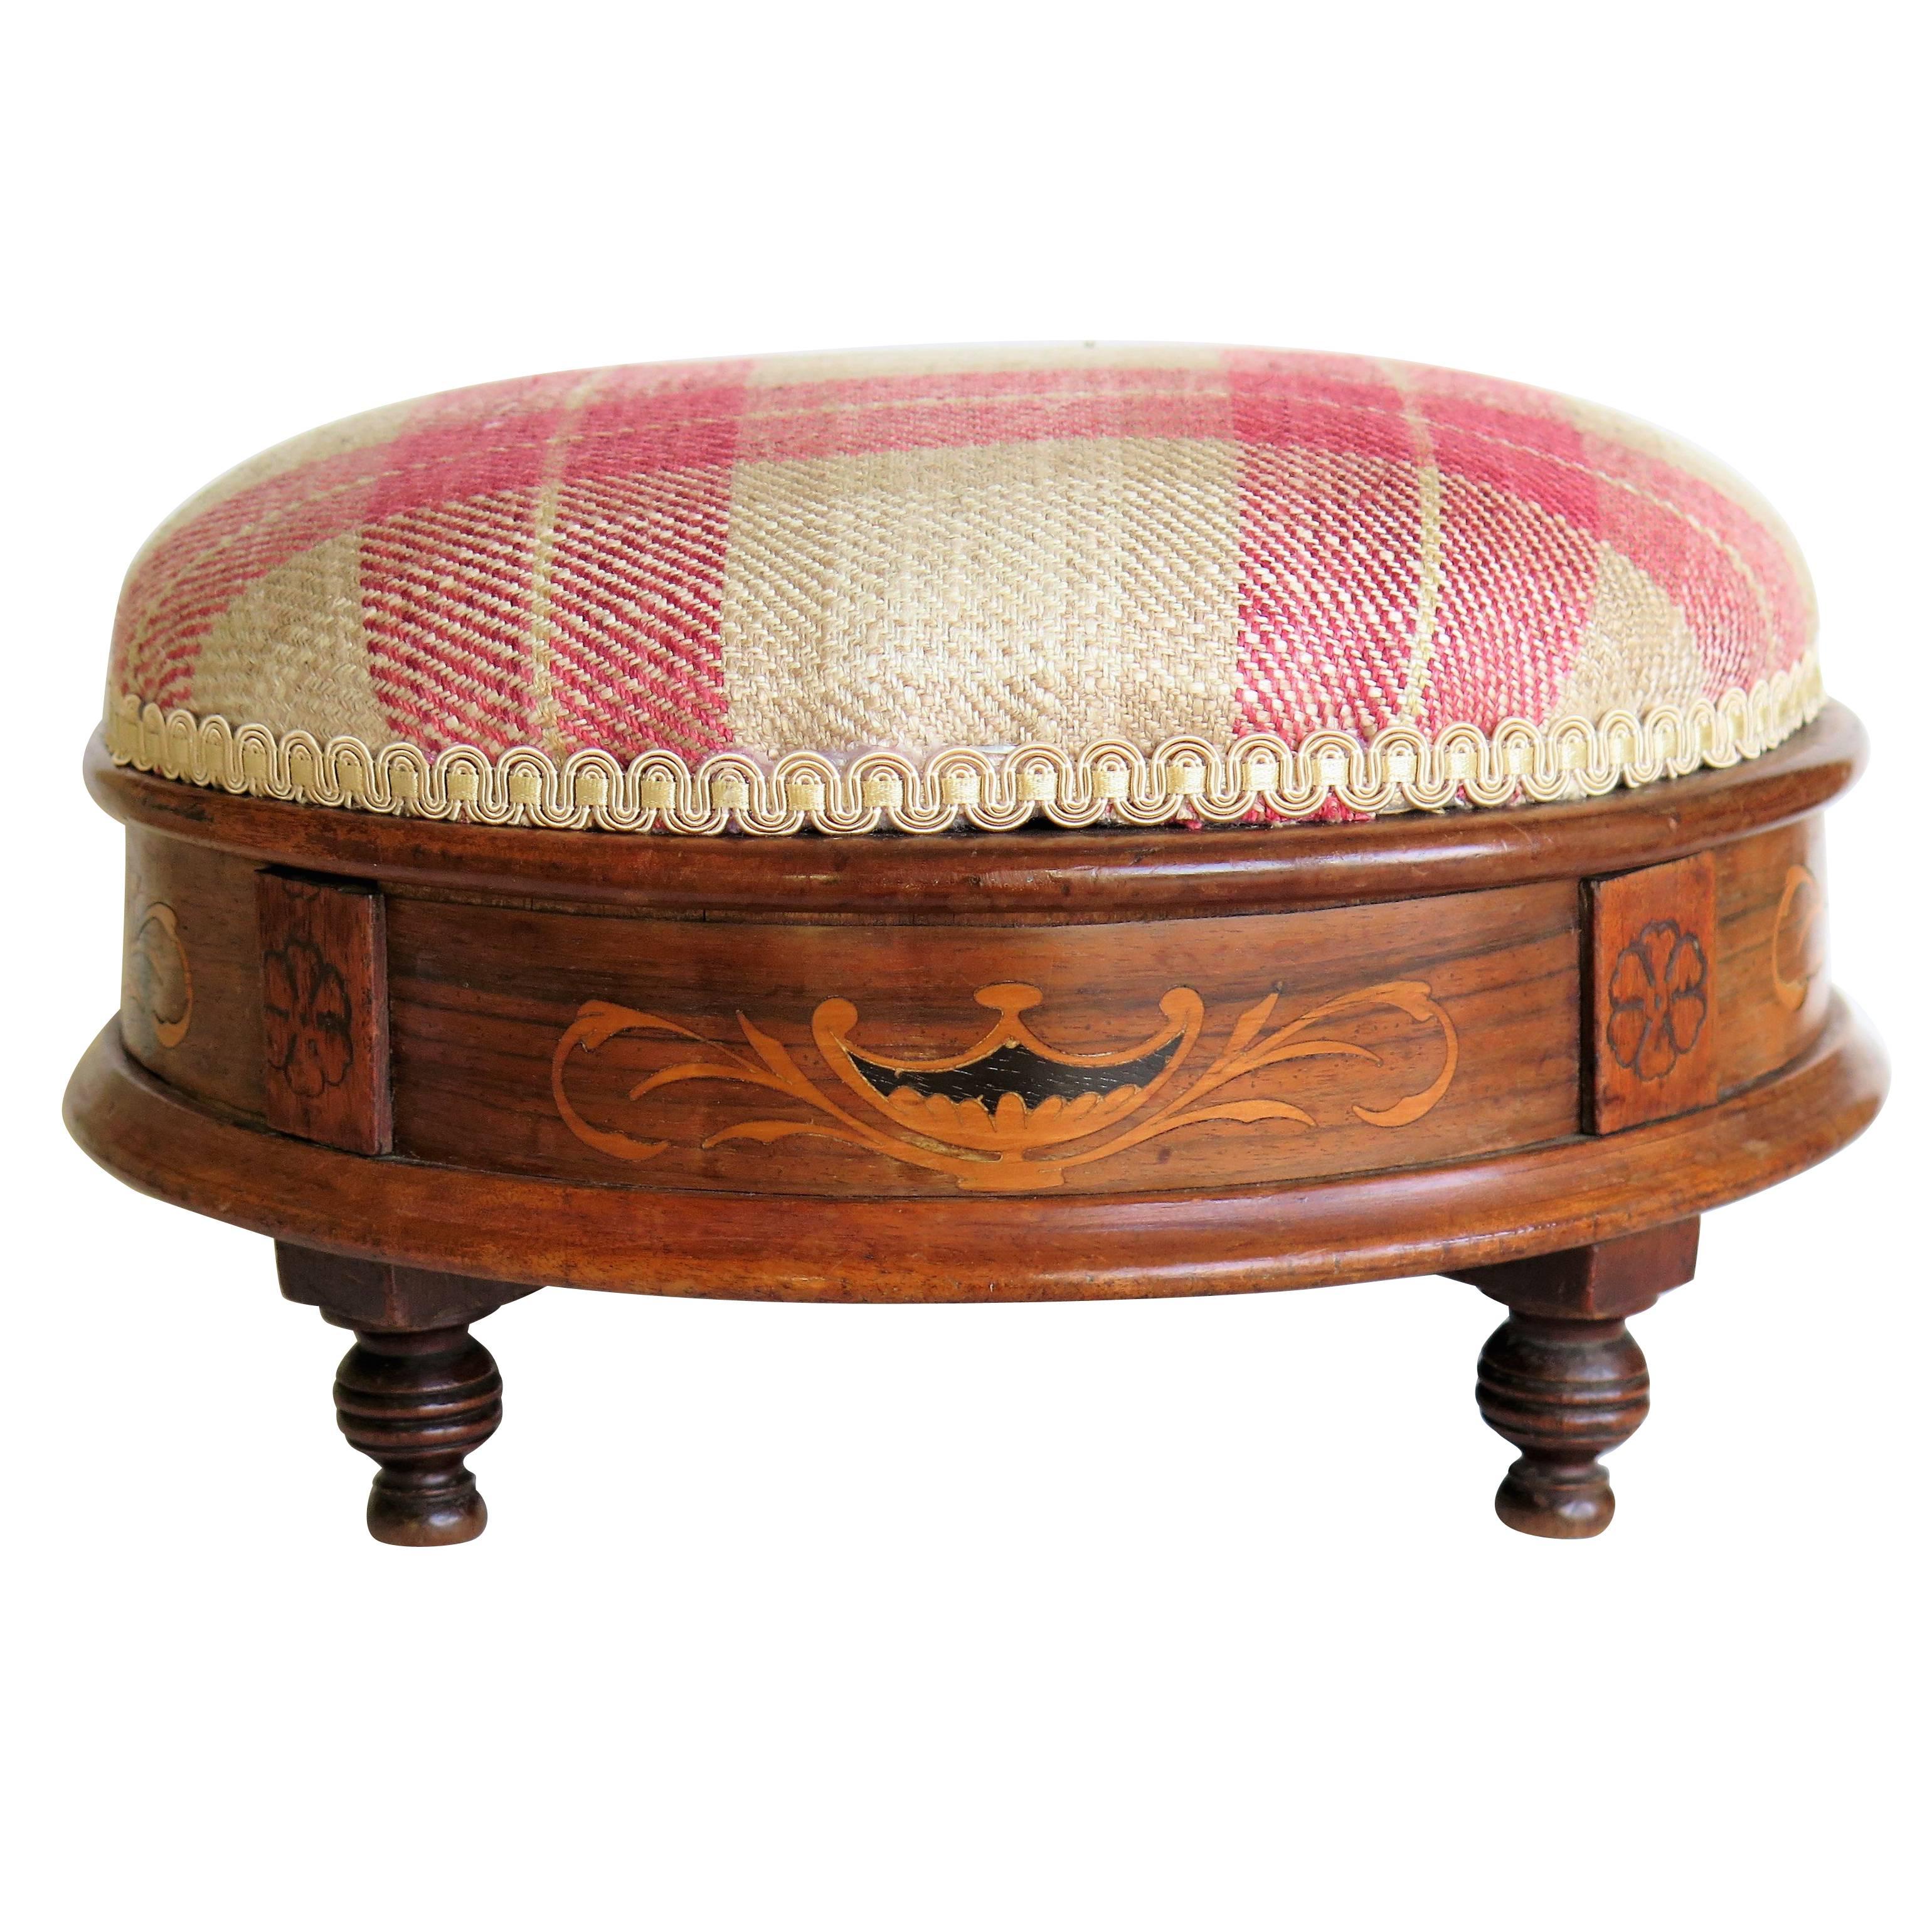 This is a very nice quality, English inlaid footstool, which we date to the early Victorian period, circa 1845.

The stool has a circular form and is made from walnut which has four sections of very decorative marquetry inlay to the sides. Each